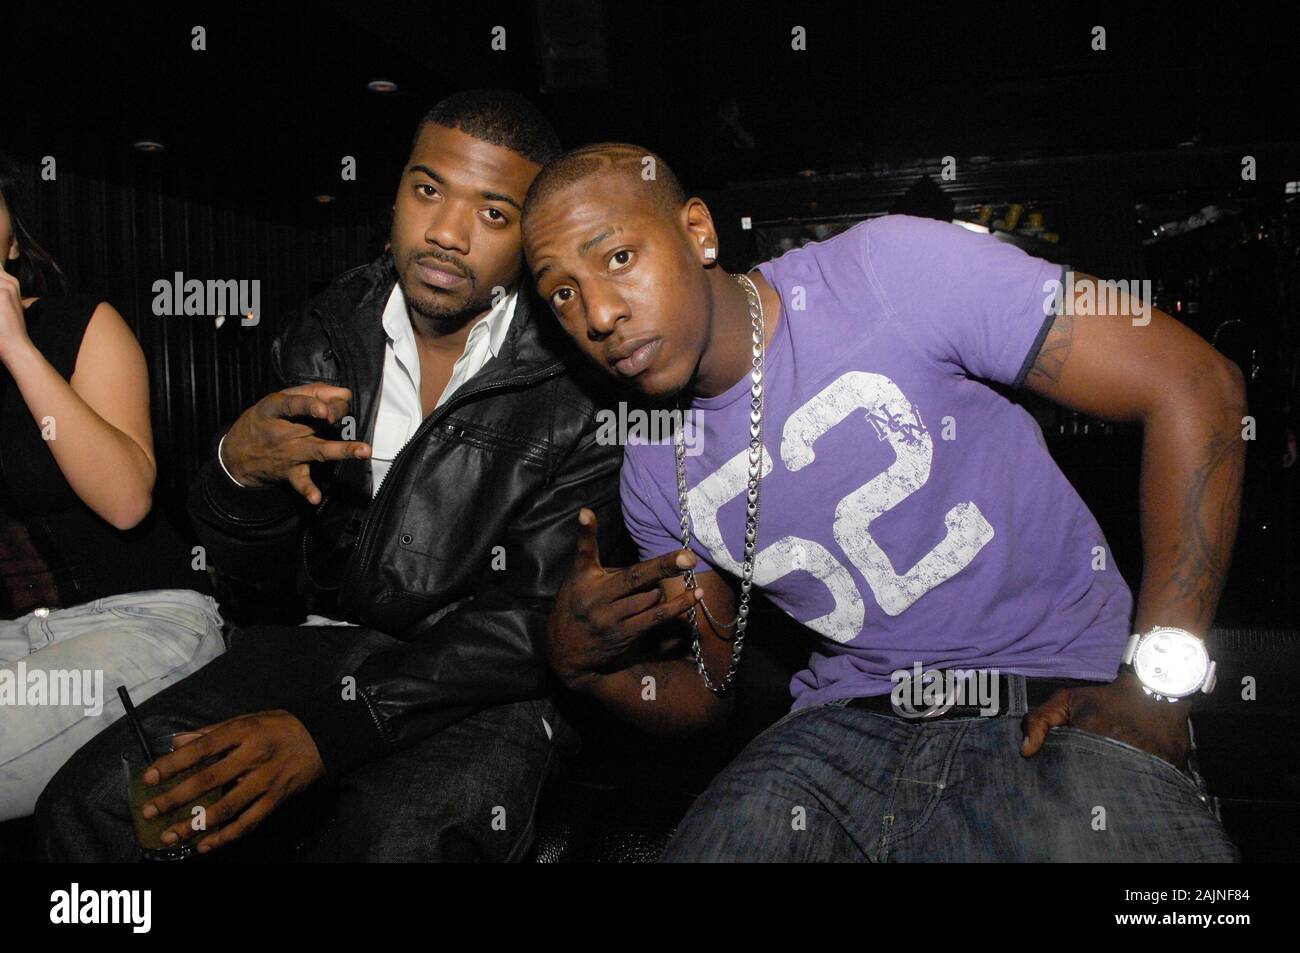 (L-R) Singer / Actor Ray J Norwood and rapper Shorty Mack at Wonderland on January 21, 2010 in Hollywood, California. Stock Photo